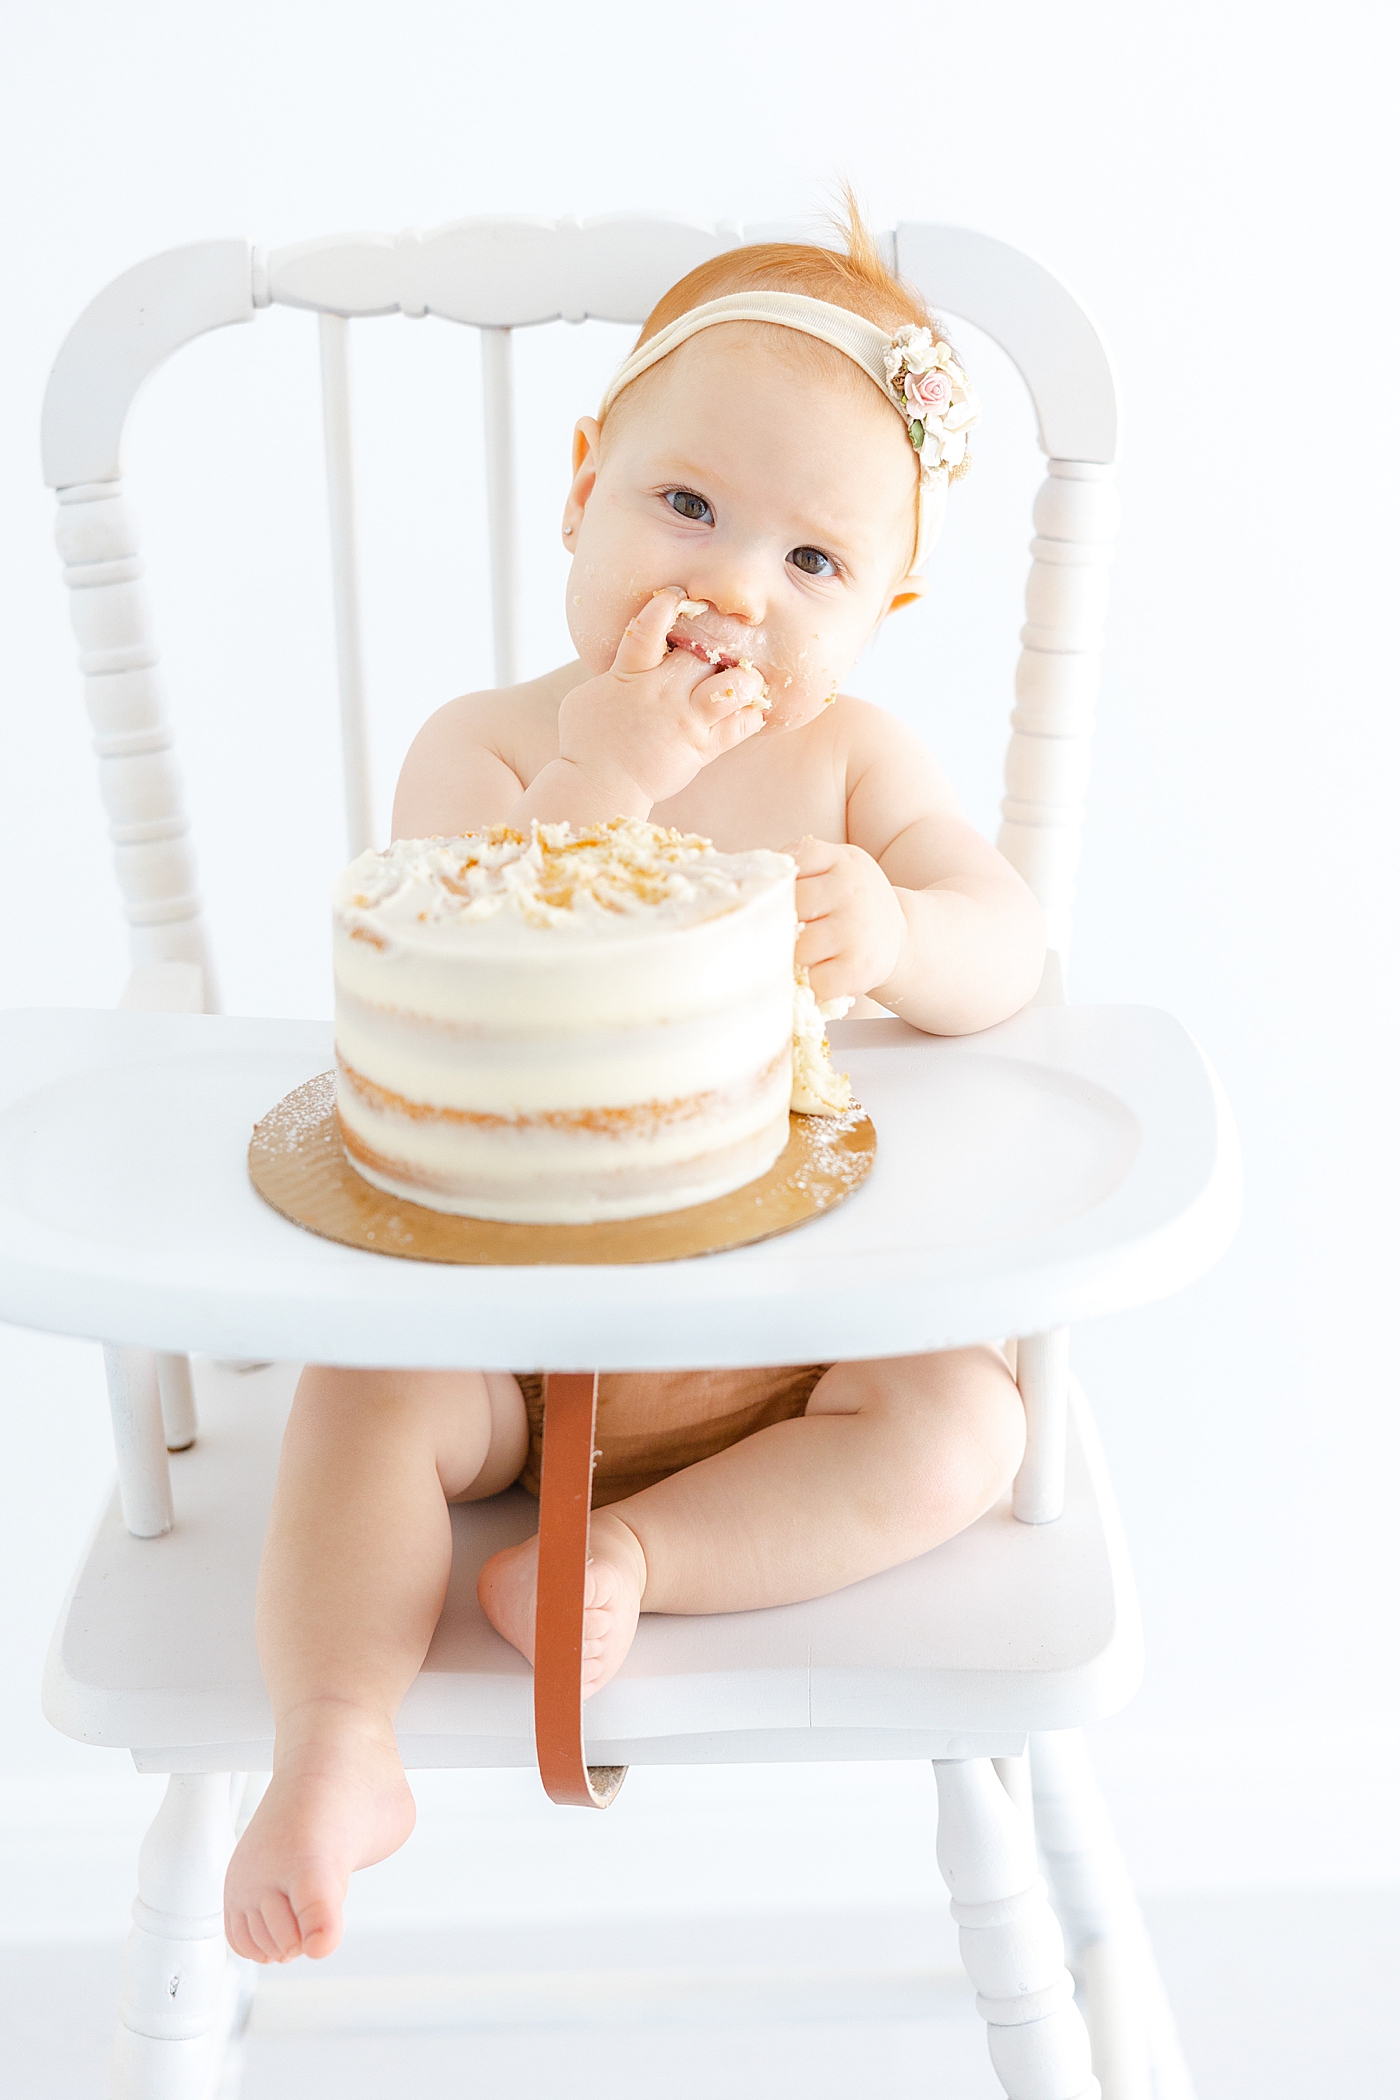 Image of baby girl in a highchair eating cake during her One Year Milestone Collection | Image by Sana Ahmed Photography